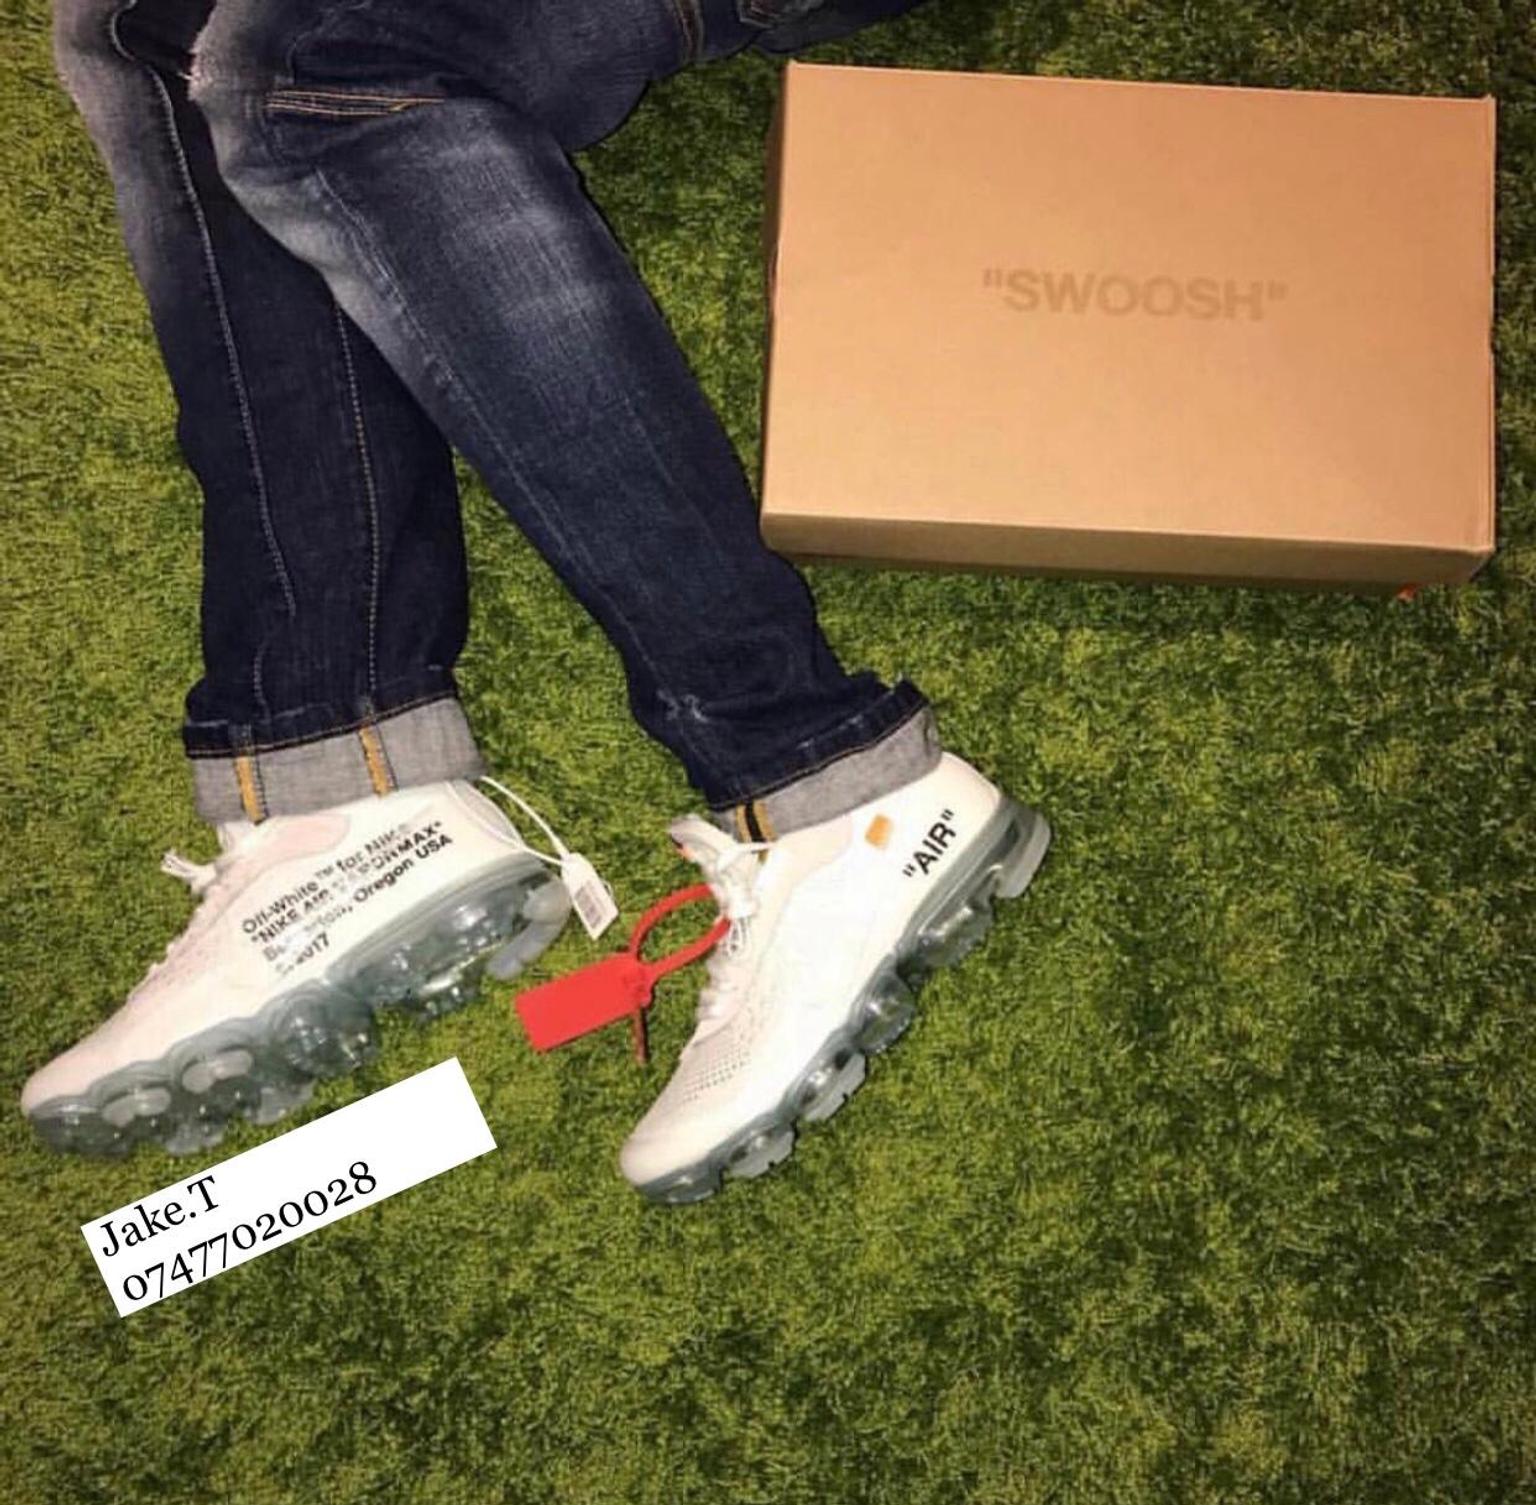 vapormax and jeans